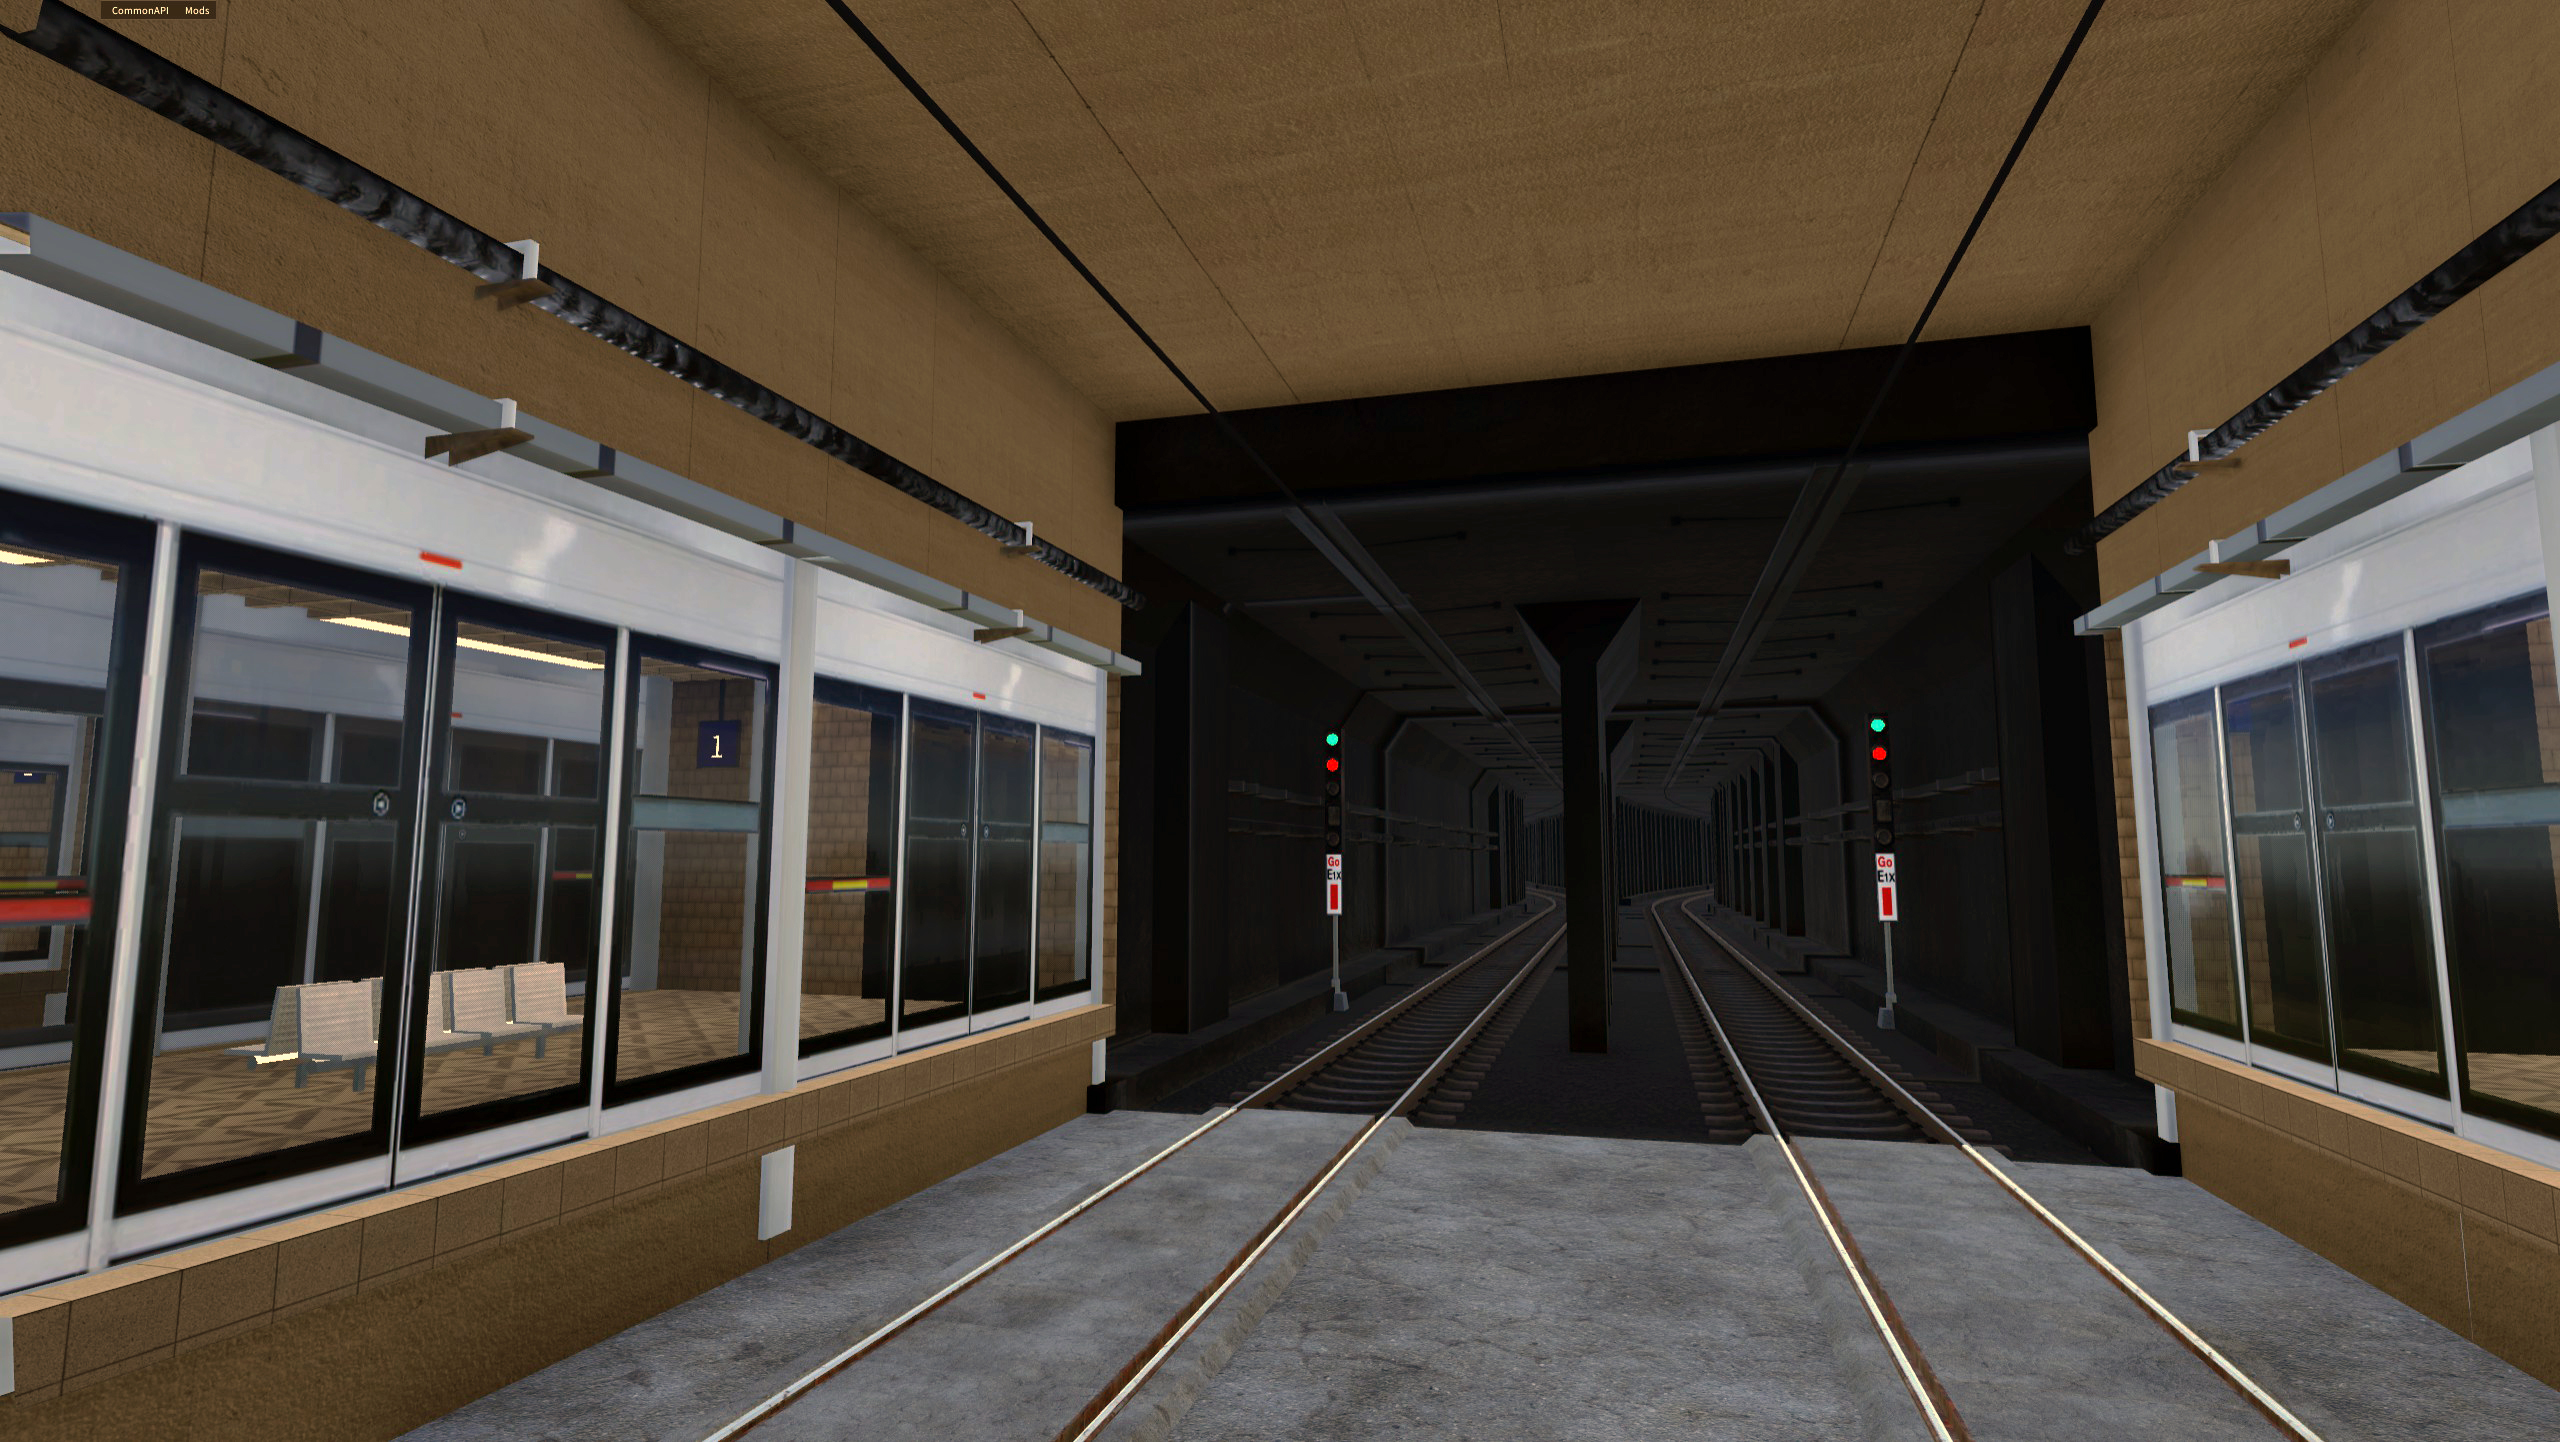 This is what the railway tunnel should look like~ :P